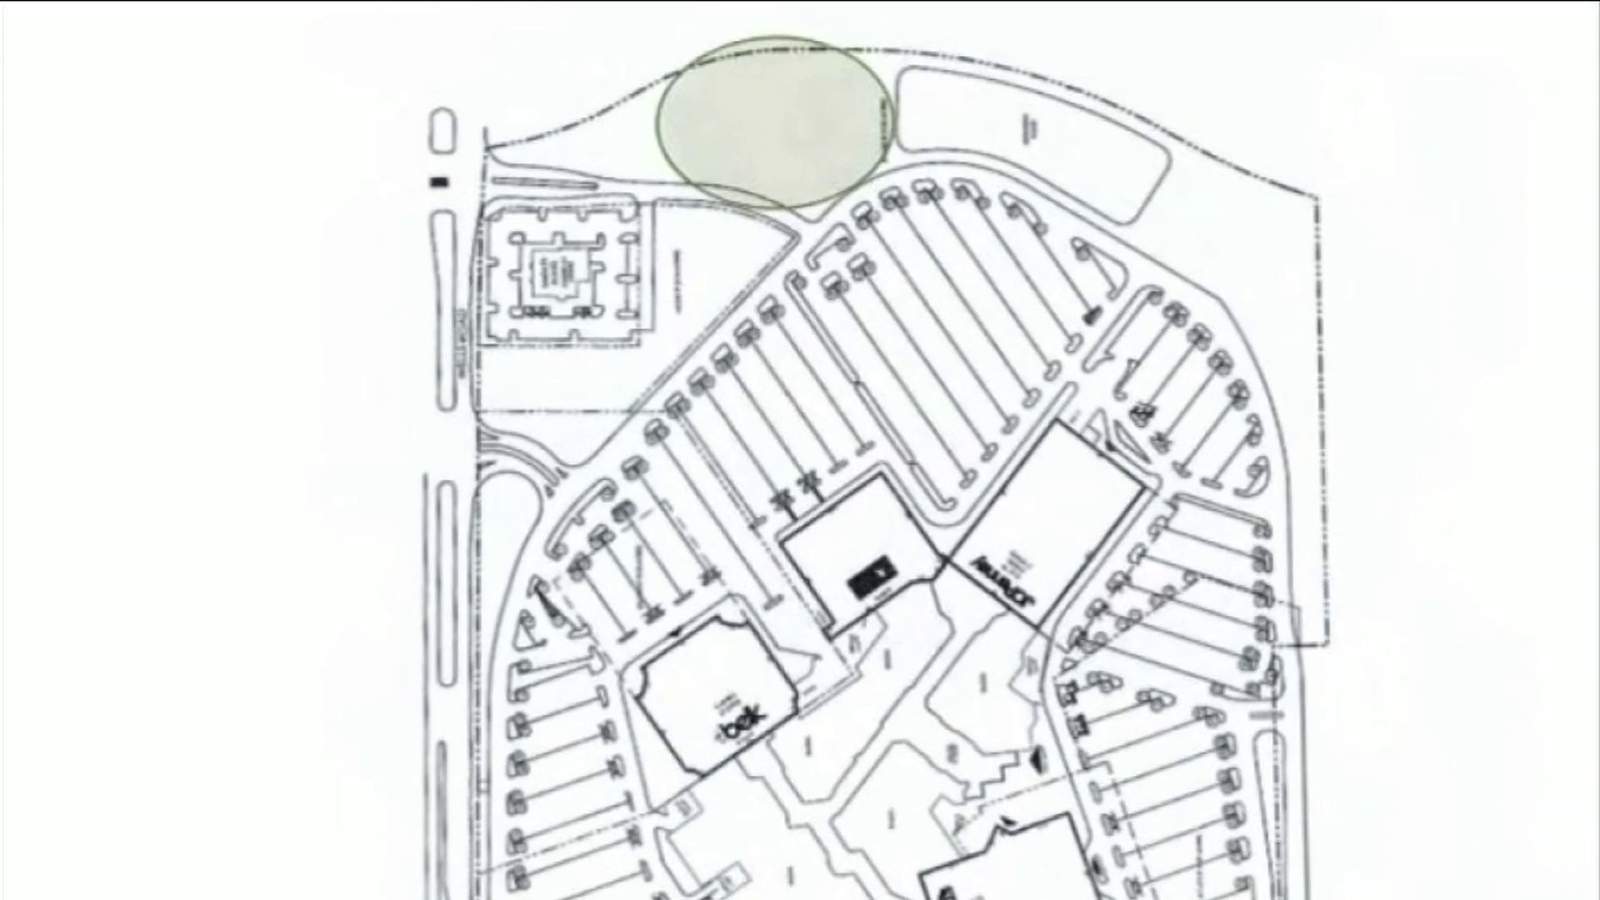 Orange Park Mall wants to turn grassy area into large venue